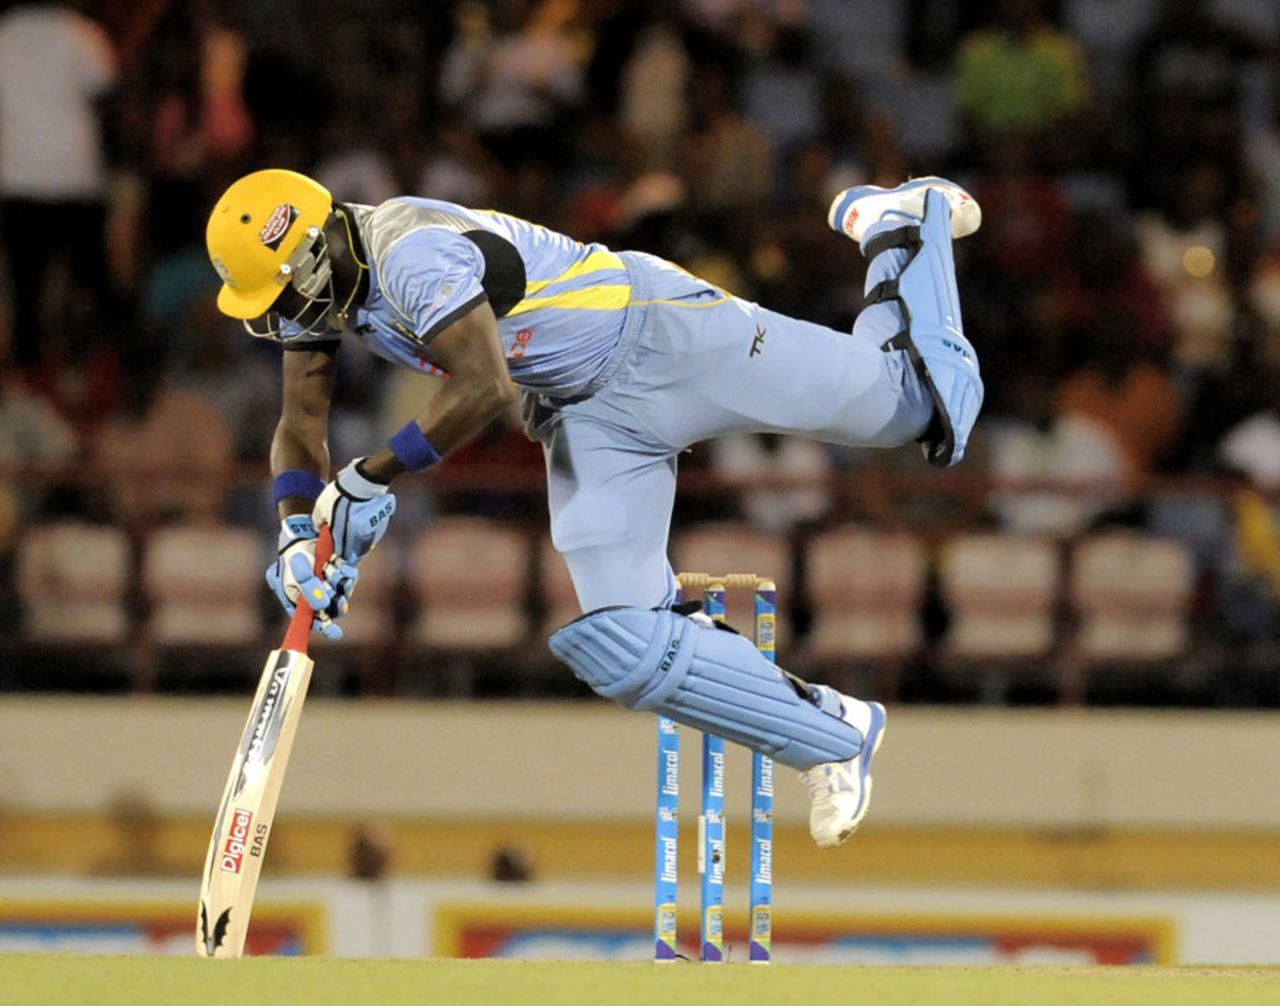 Darren Sammy loses his footing during an innings of 26, St Lucia Zouks v Jamaica Tallawahs, Caribbean Premier League, Gros Islet, August 10, 2013
